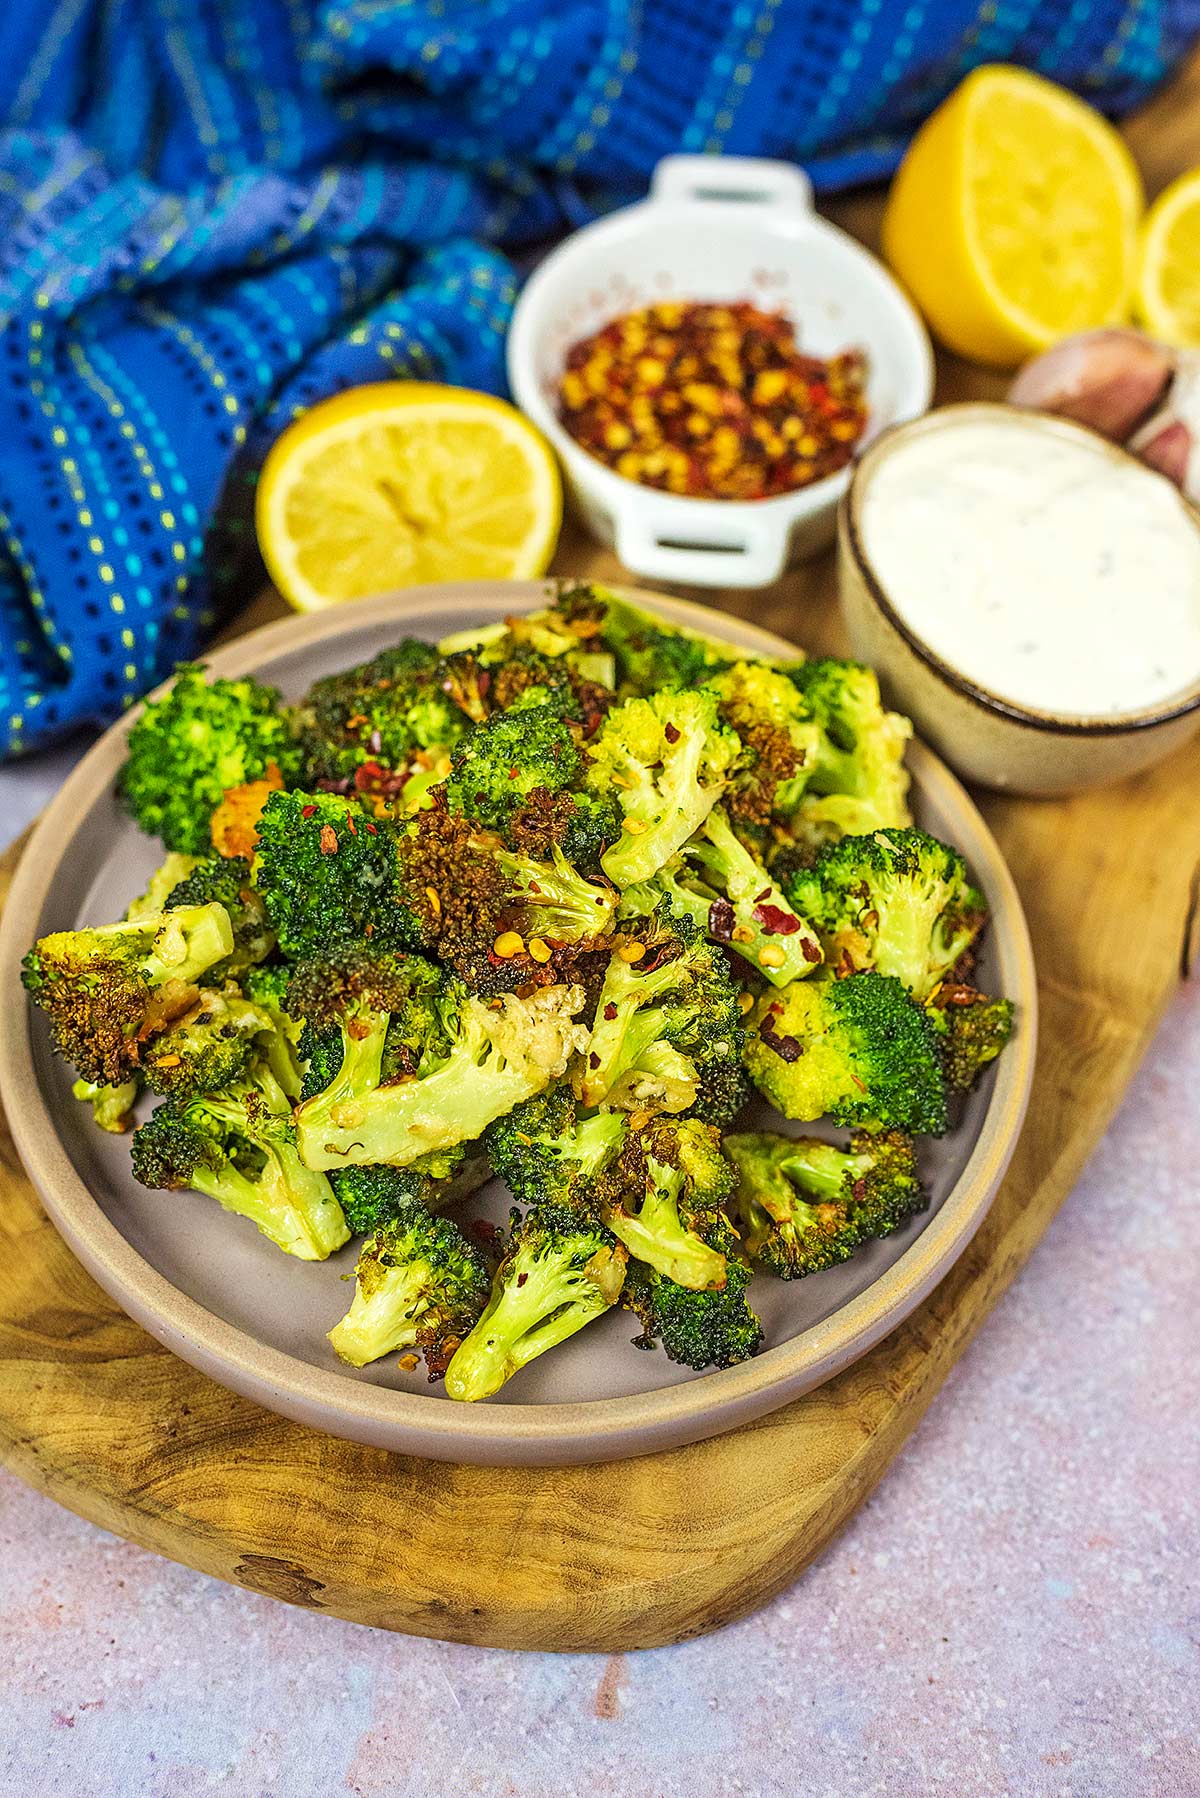 A wooden serving board with a plate of cooked broccoli on it.